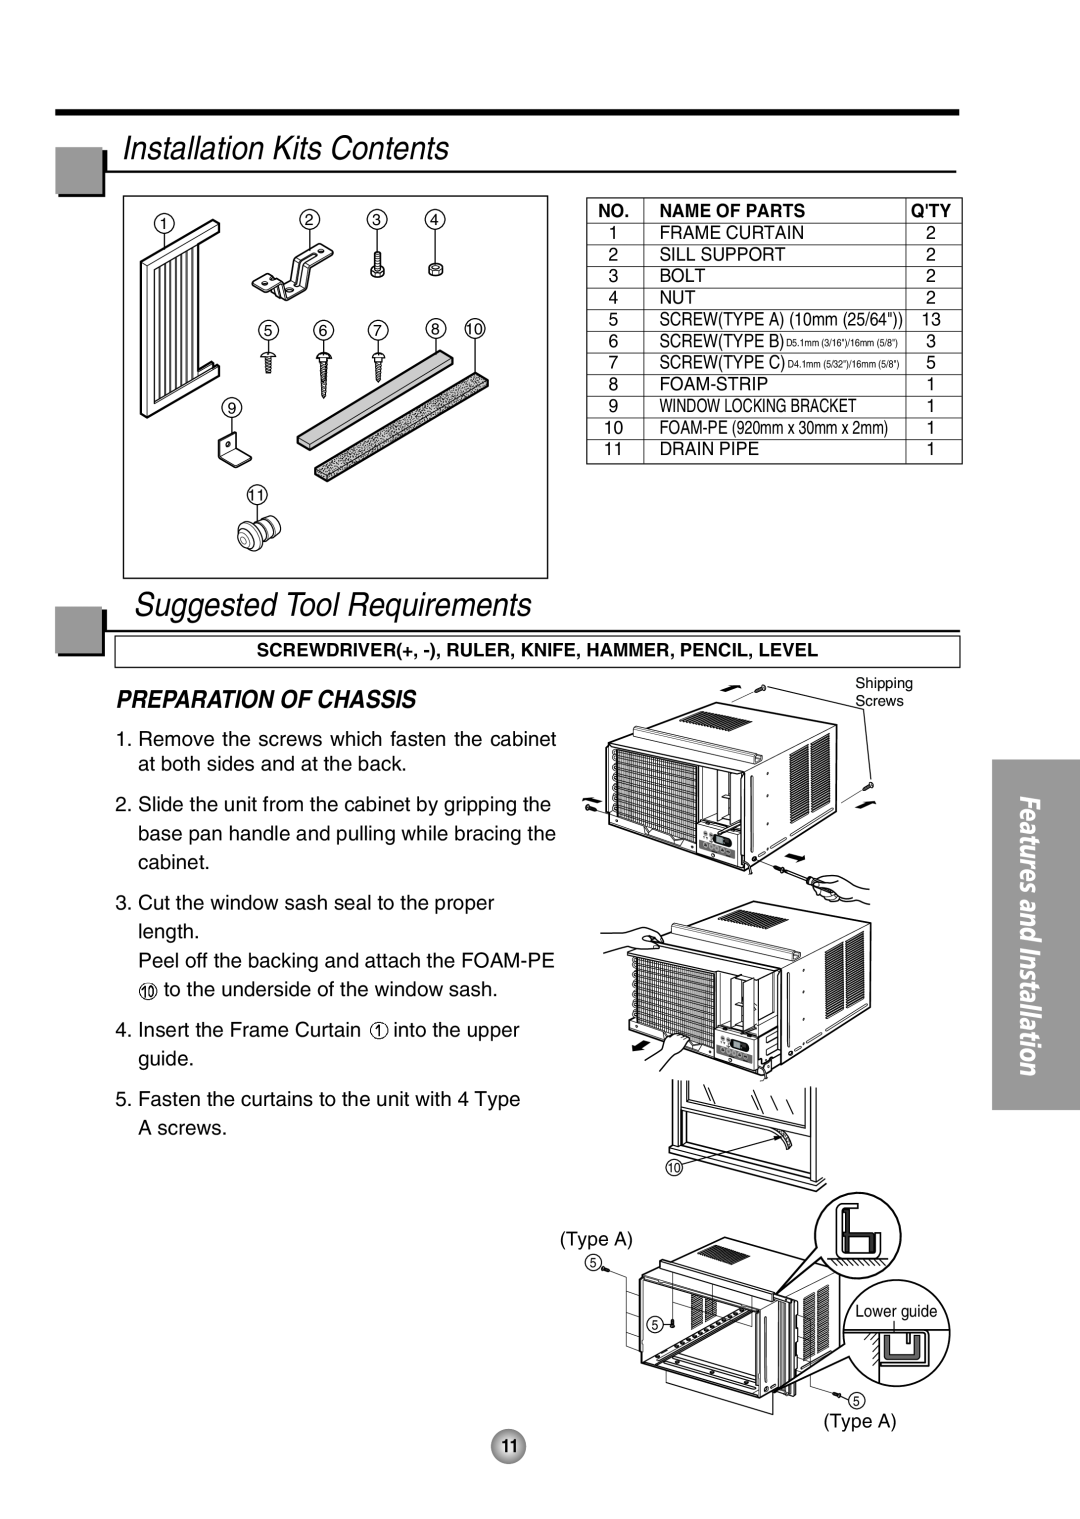 Panasonic CW-XC125HU, CW-XC105HU Installation Kits Contents, Suggested Tool Requirements, Preparation Of Chassis 